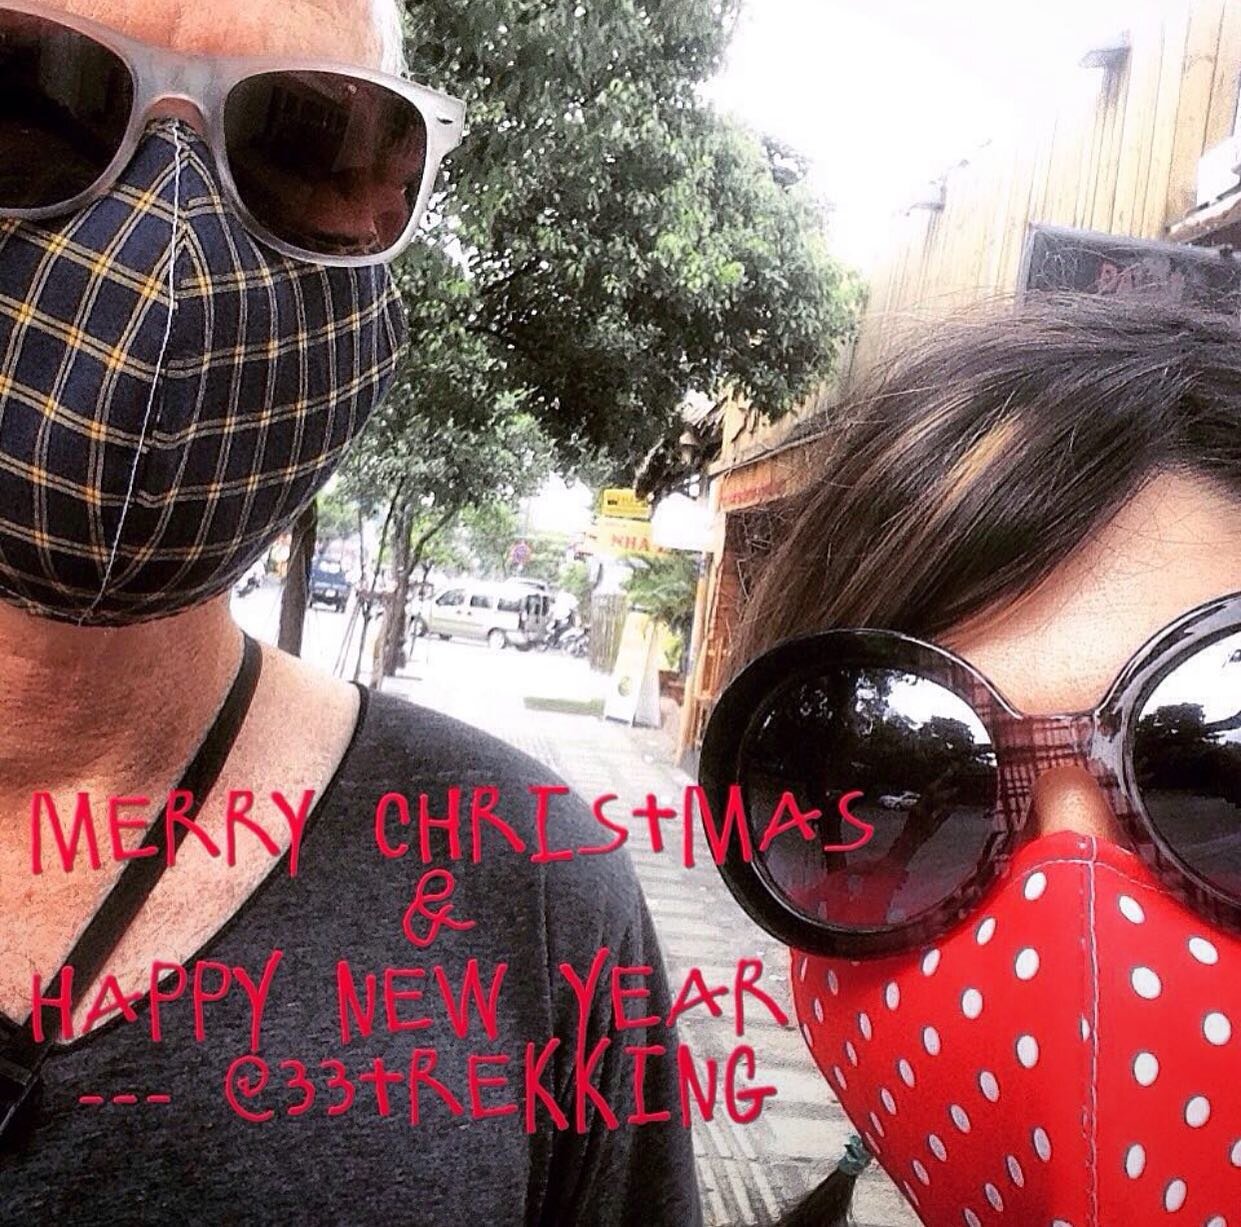 Merry Christmas 🎄🎁 
&mdash; we took this 6 years ago in Hanoi but seemed appropriate this year too.